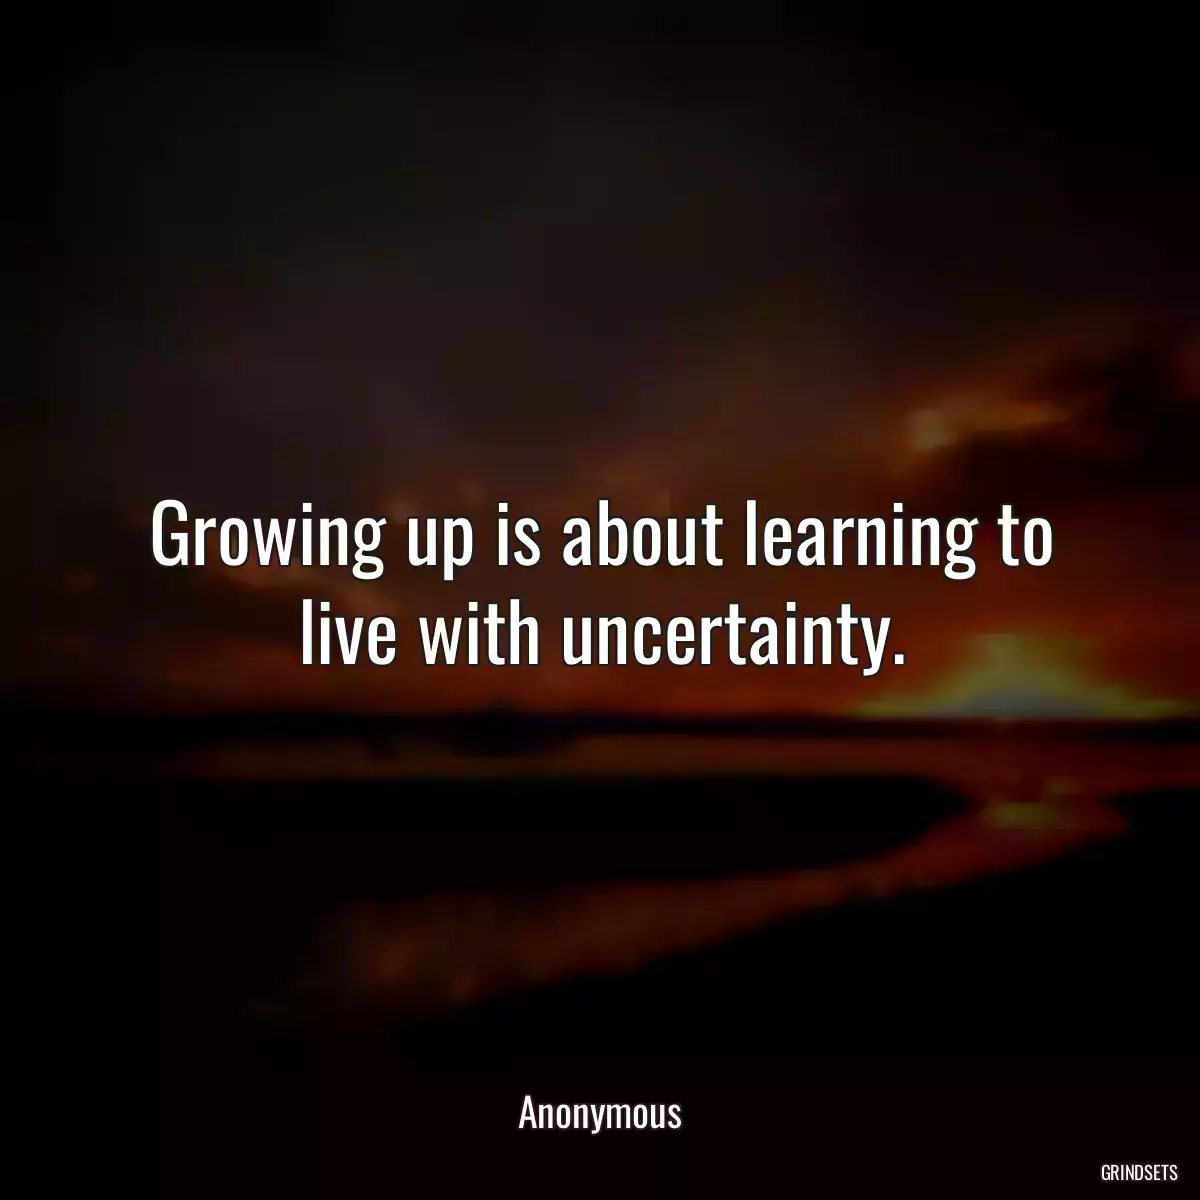 Growing up is about learning to live with uncertainty.